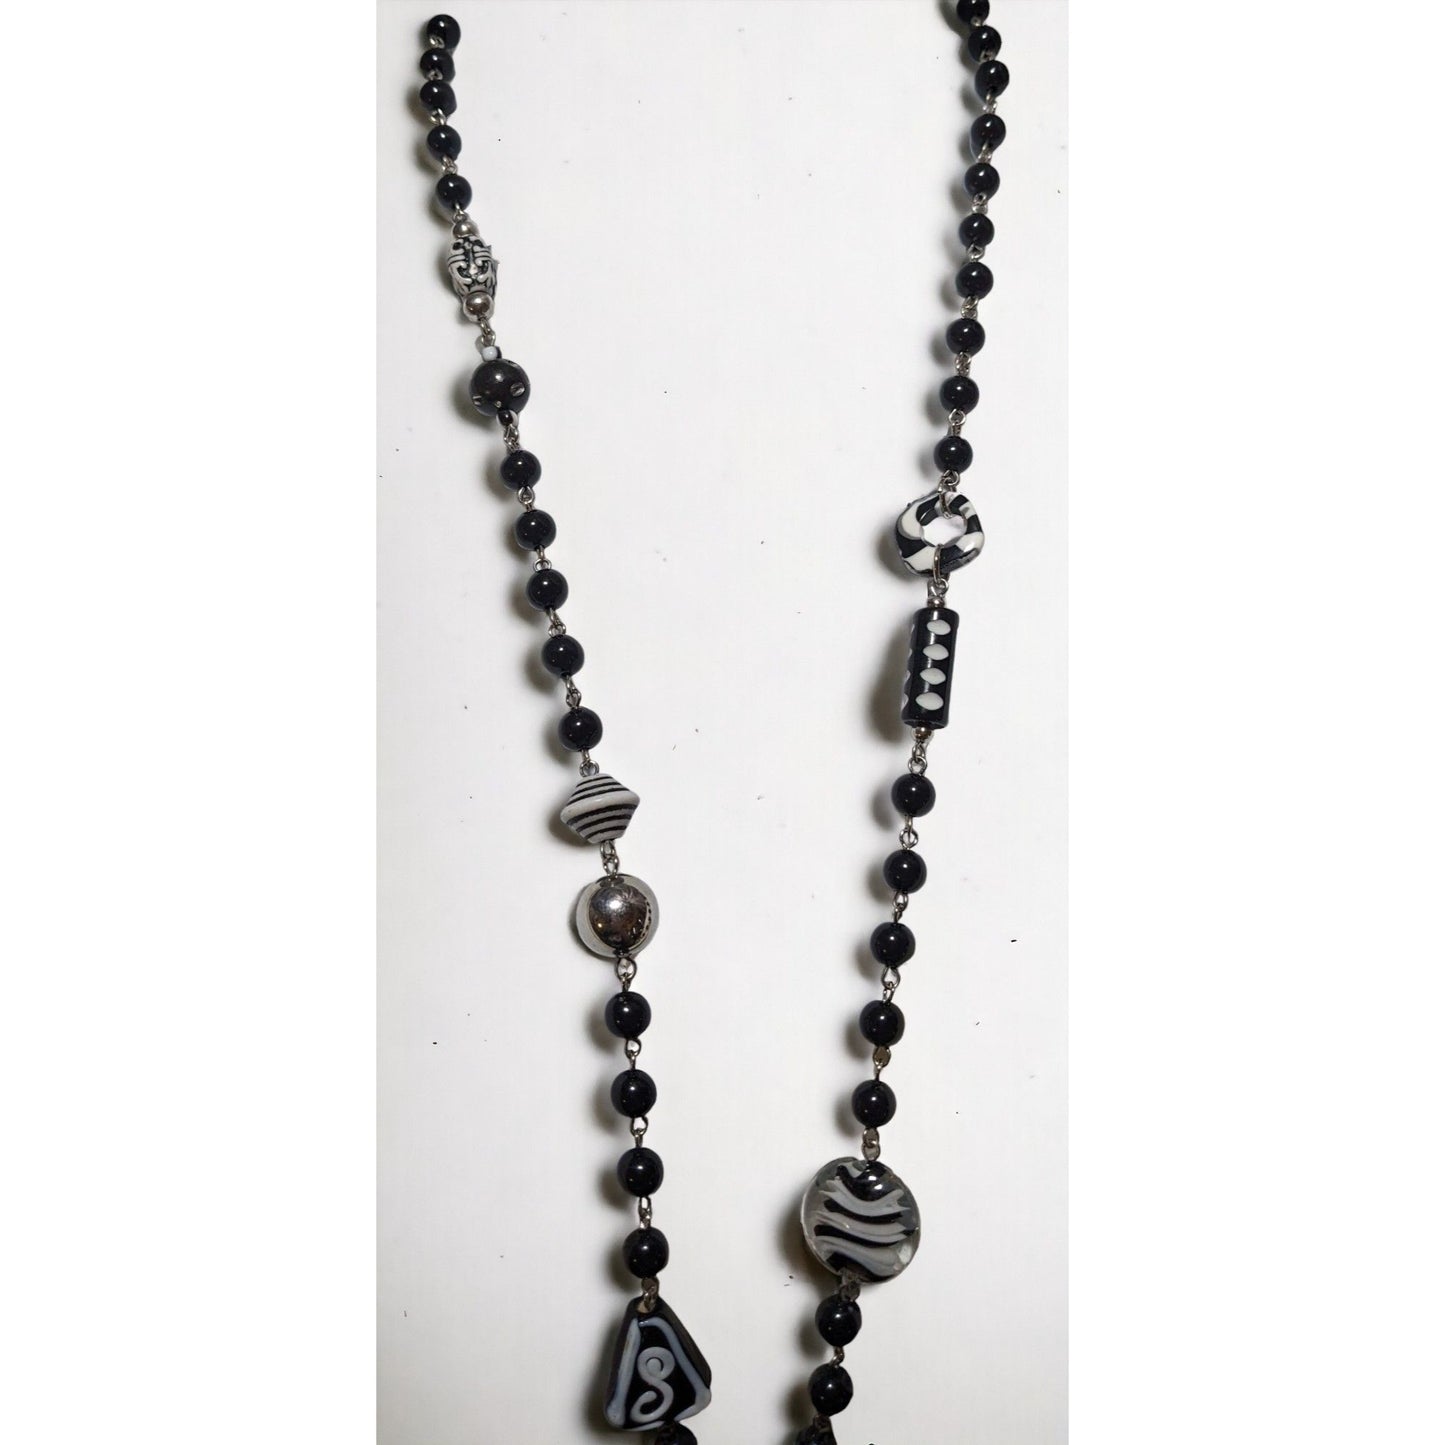 90s Style Black And White Geometric Beaded Necklace